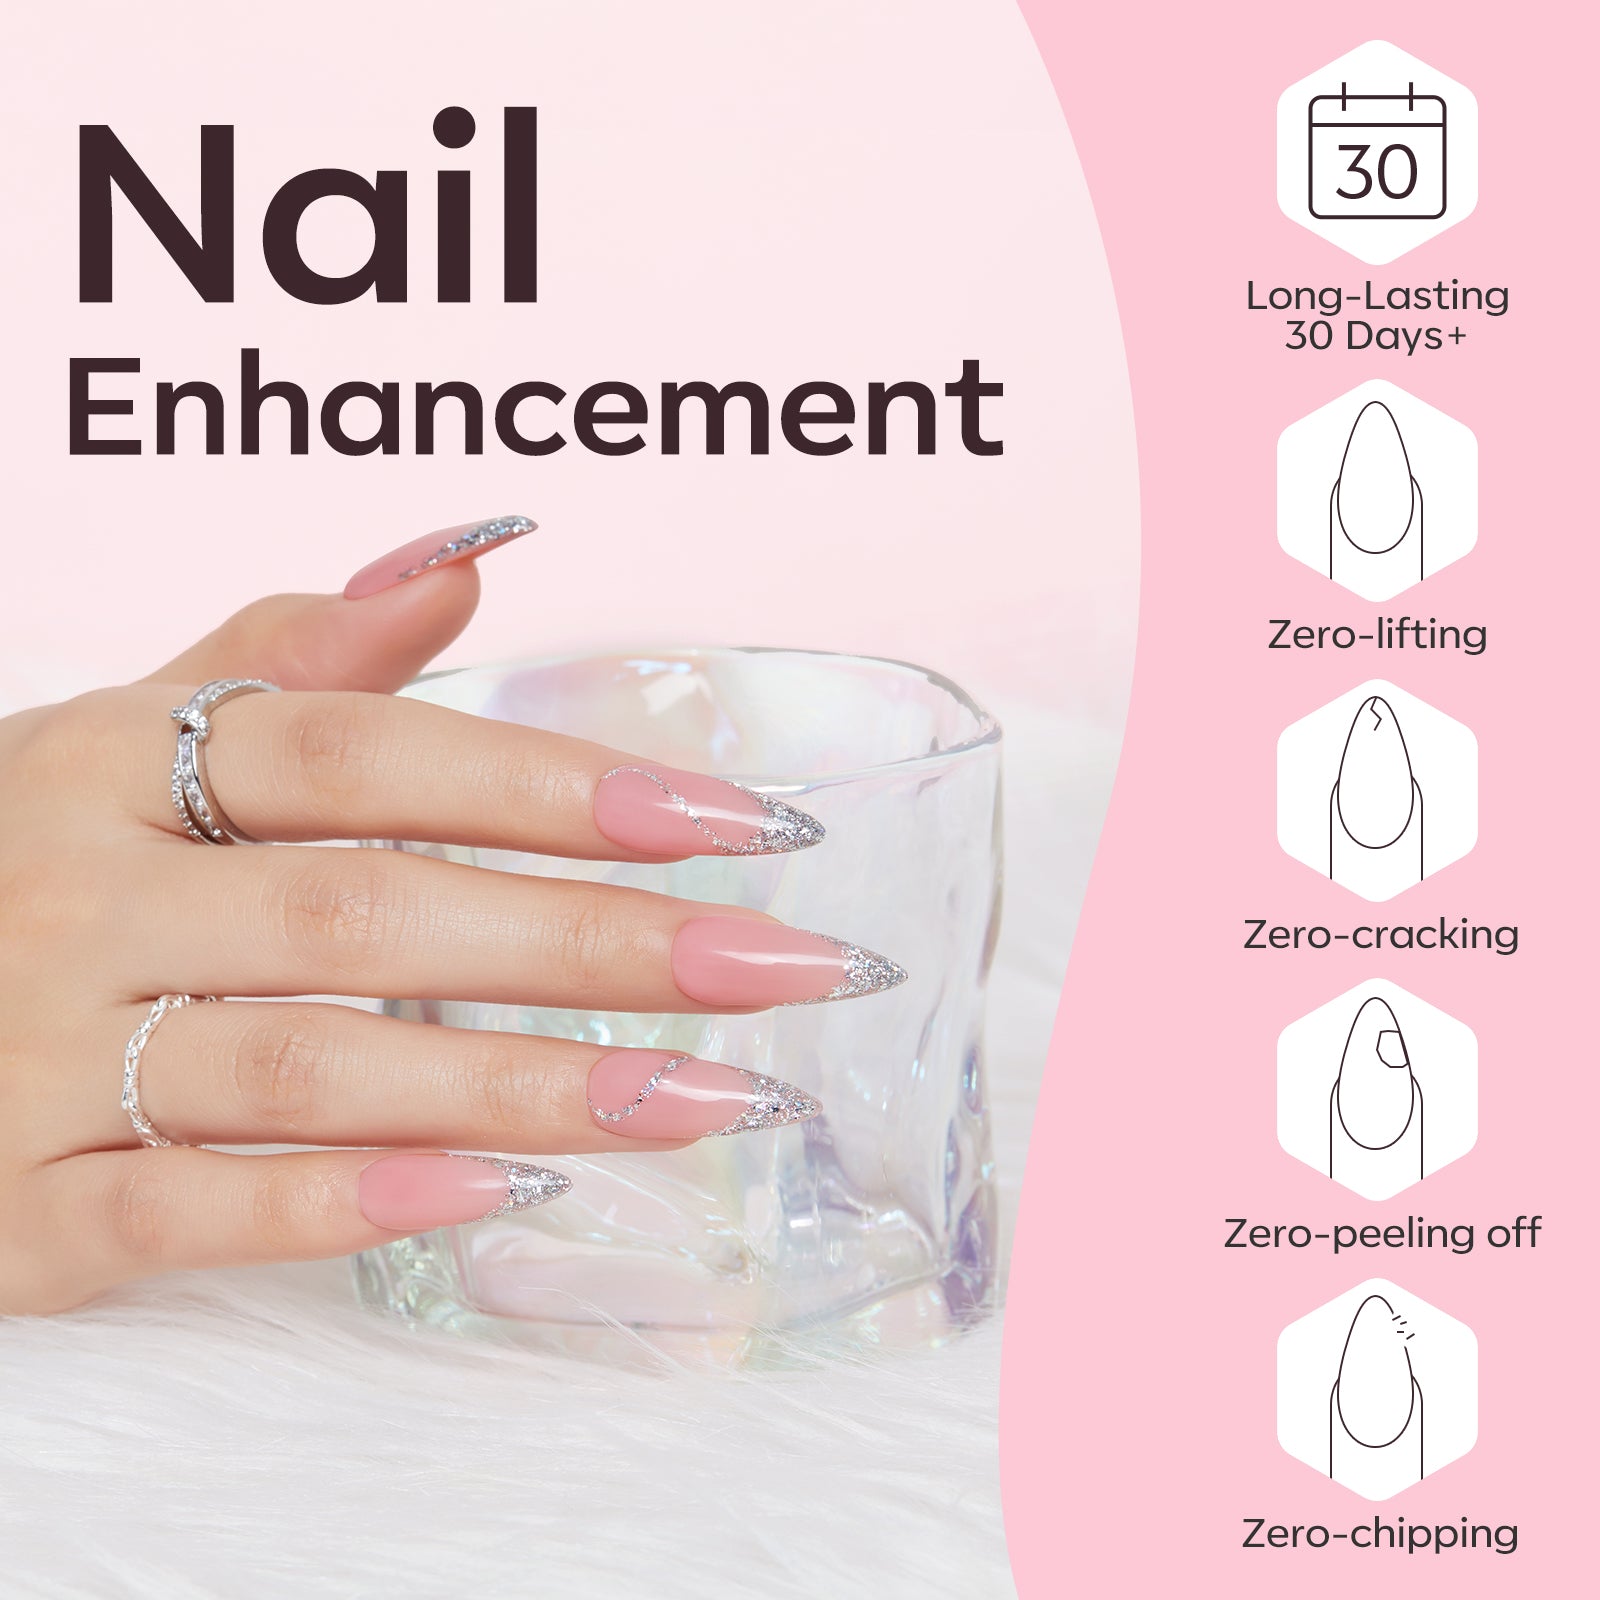 Nude Pink - 6Pcs 8-in-1 Builder Nail Gel Set 7ml【US/CA/AU/UK ONLY】